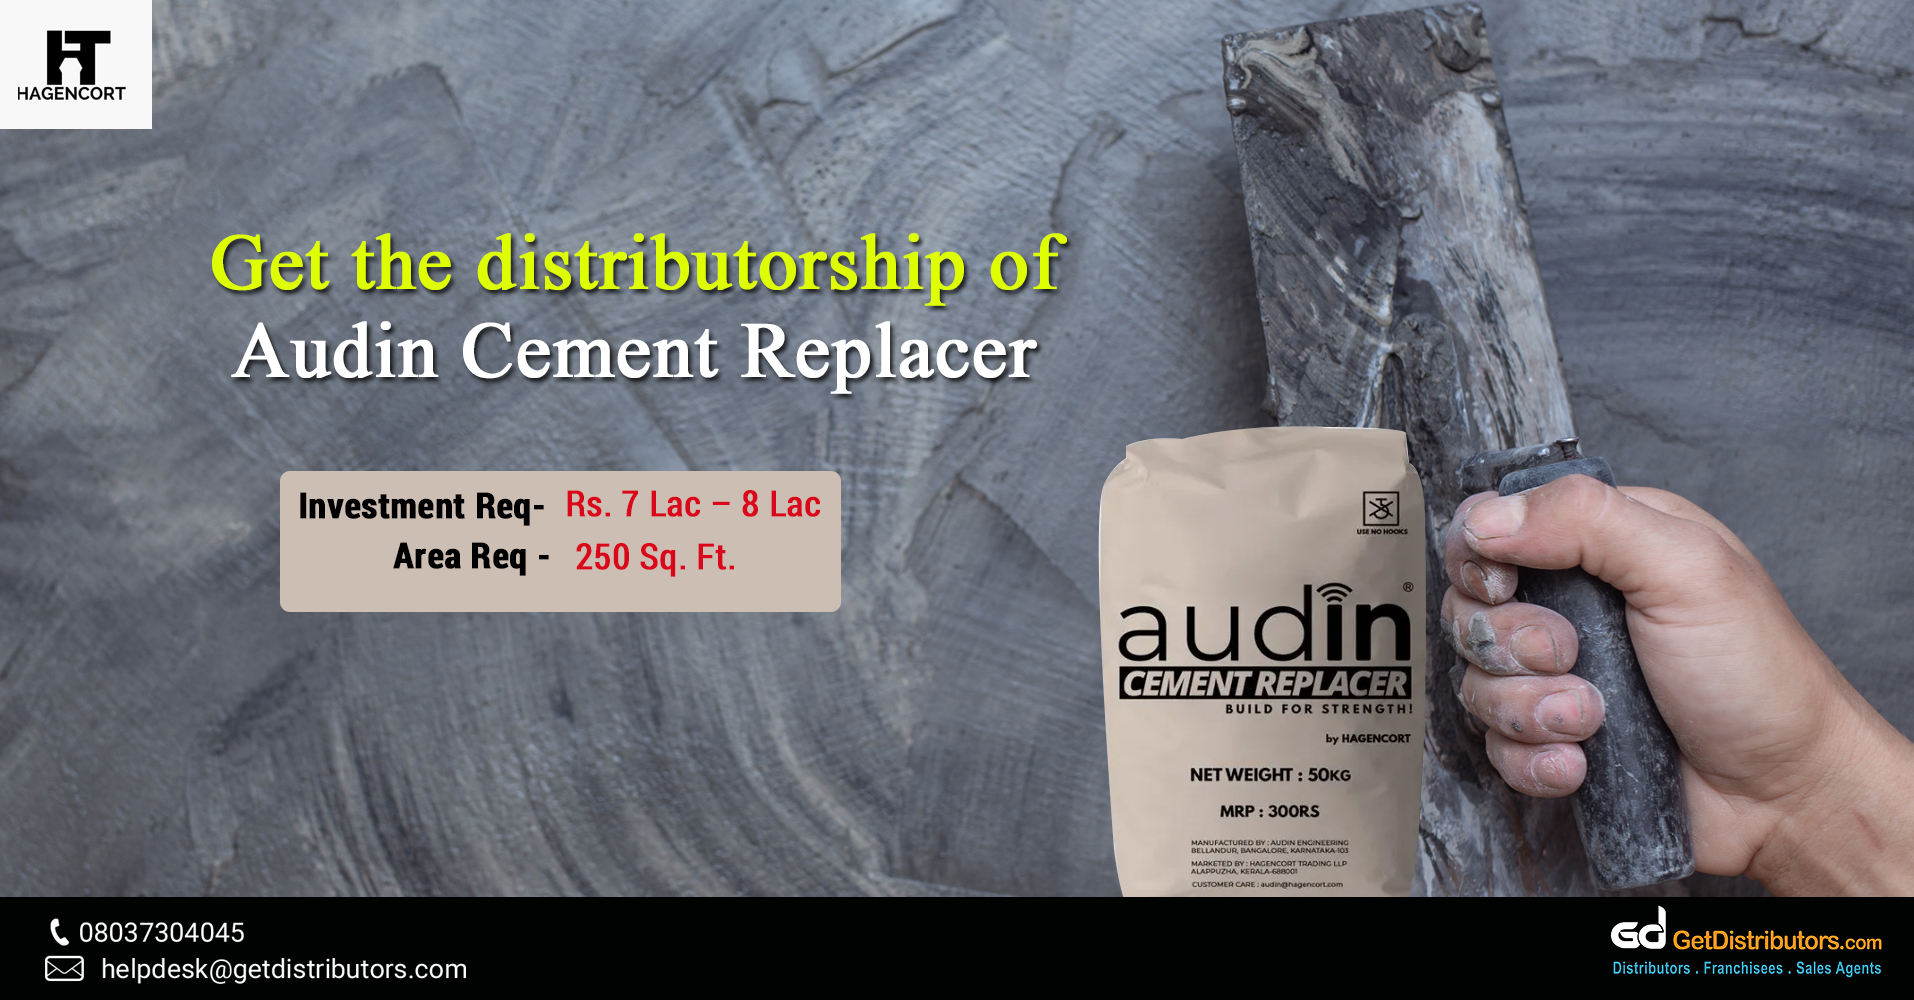 Audin cement replacer for distribution